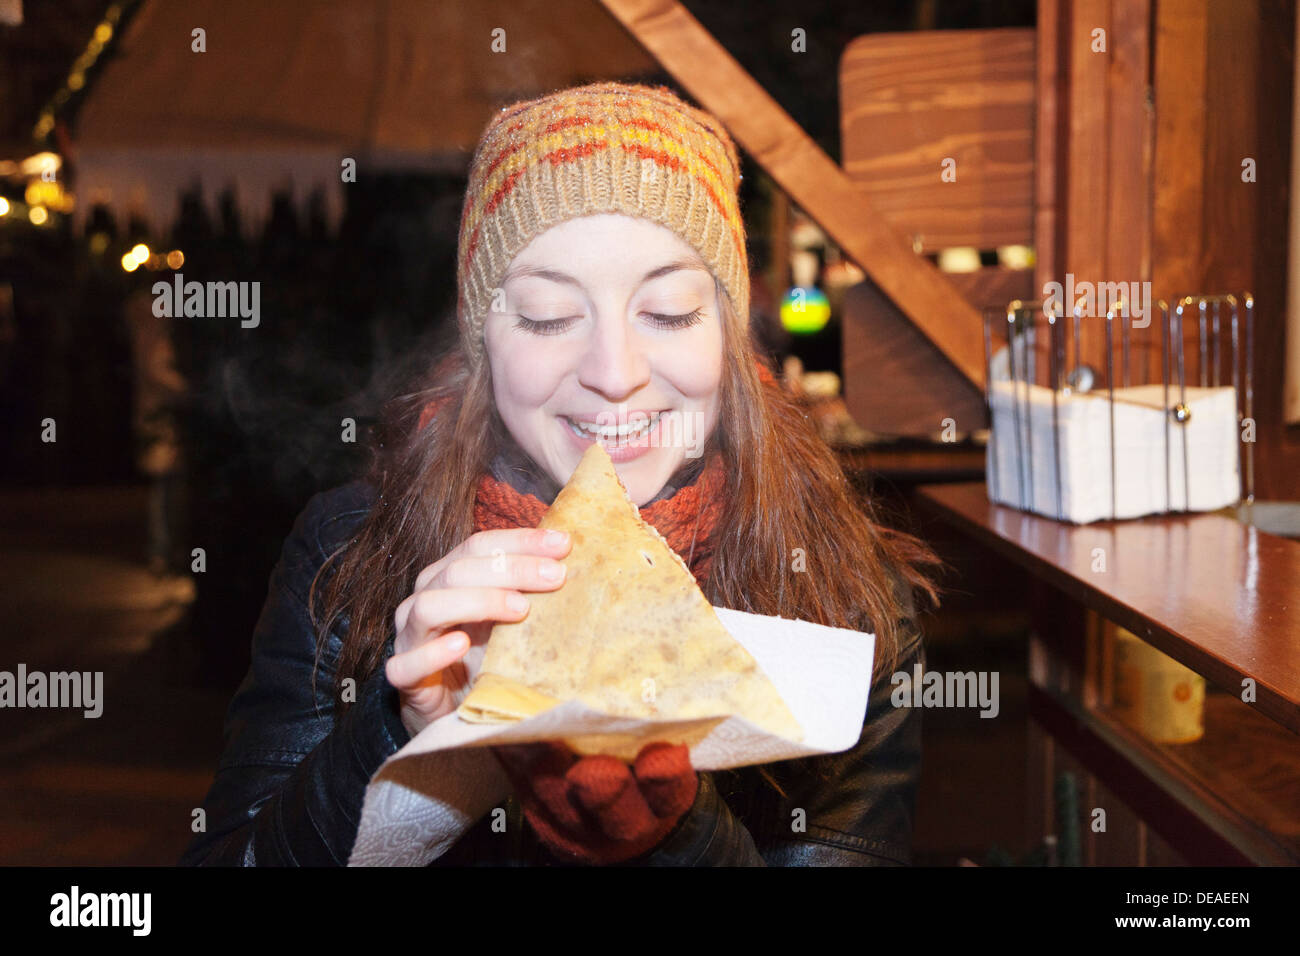 Young woman at the Christmas fair eating crepes, Esslingen, Baden Wurttemberg, Germany Stock Photo